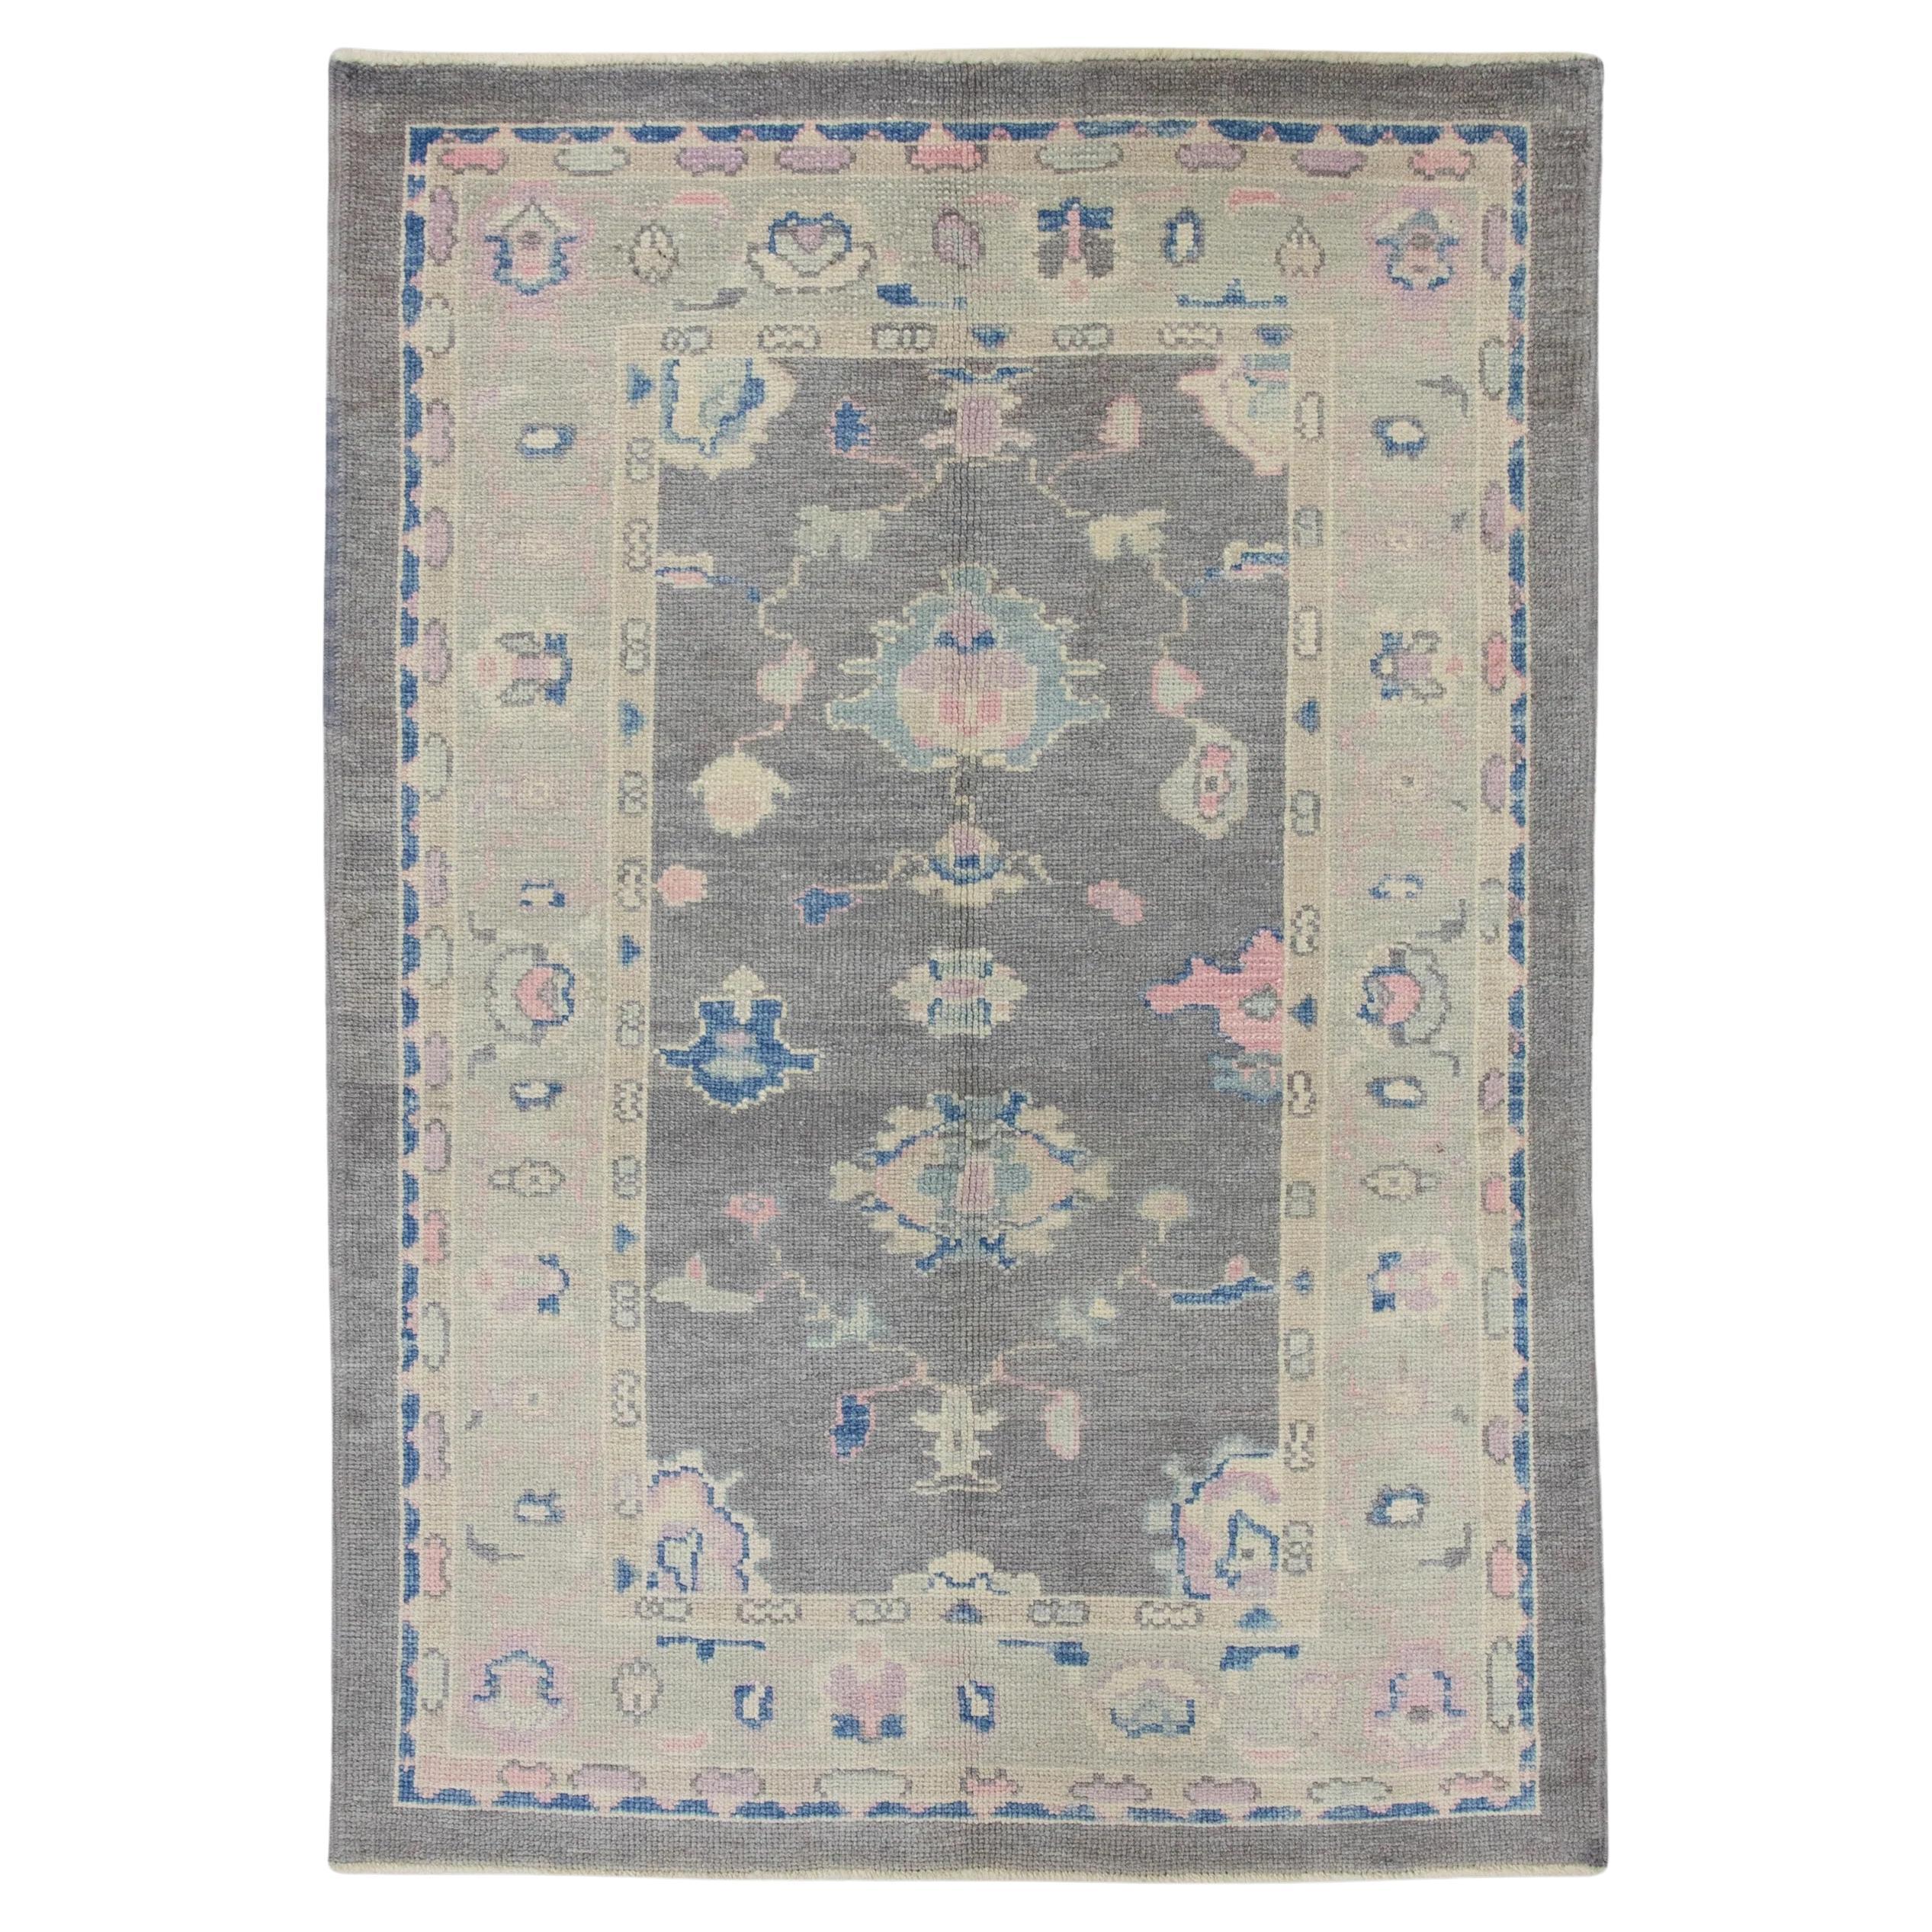 Dark Mauve Handwoven Wool Turkish Oushak Rug in Colorful Floral Design 4' x 5'11 For Sale